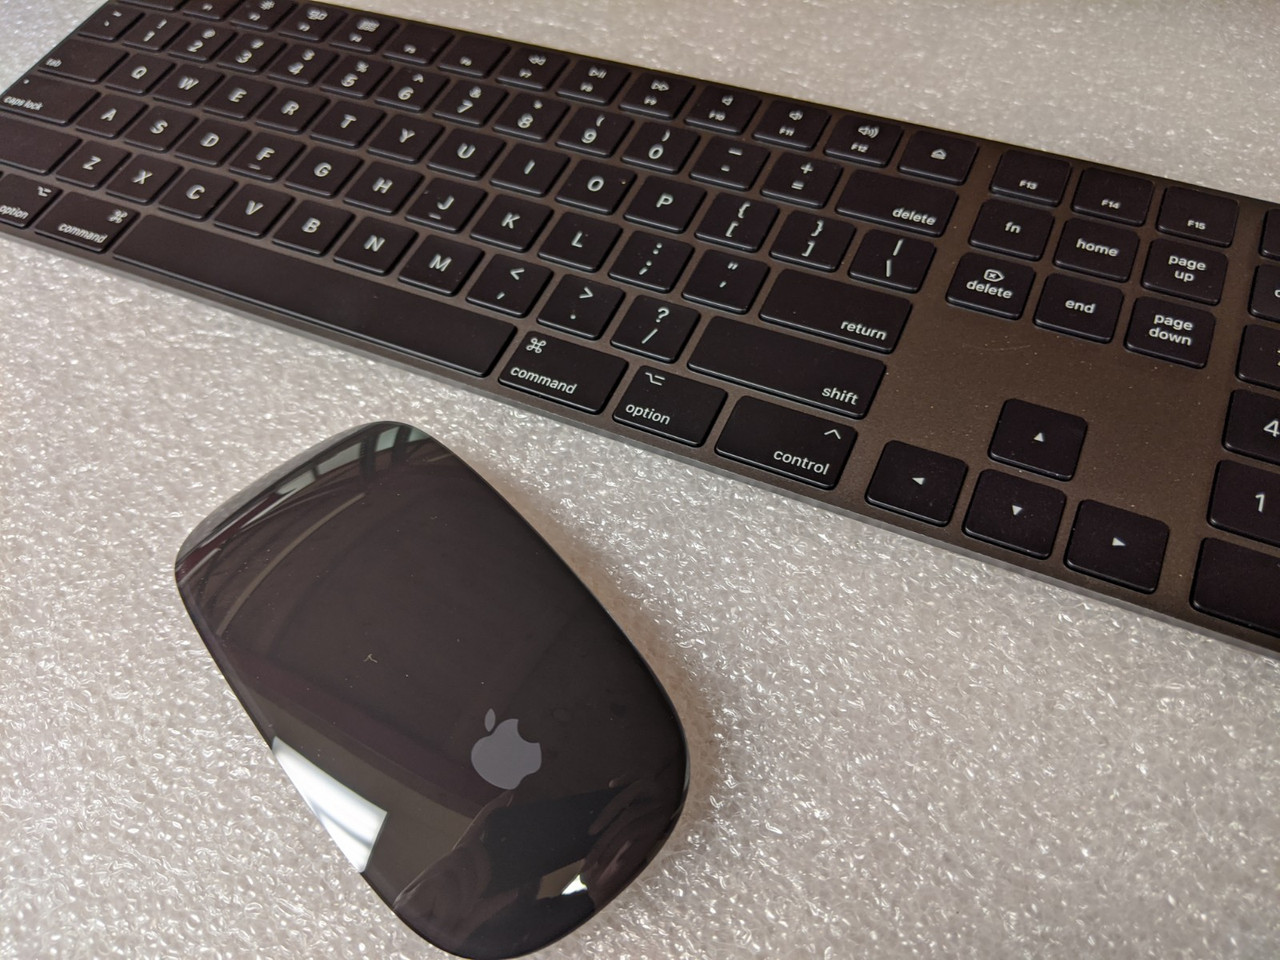 imac mouse and keyboard